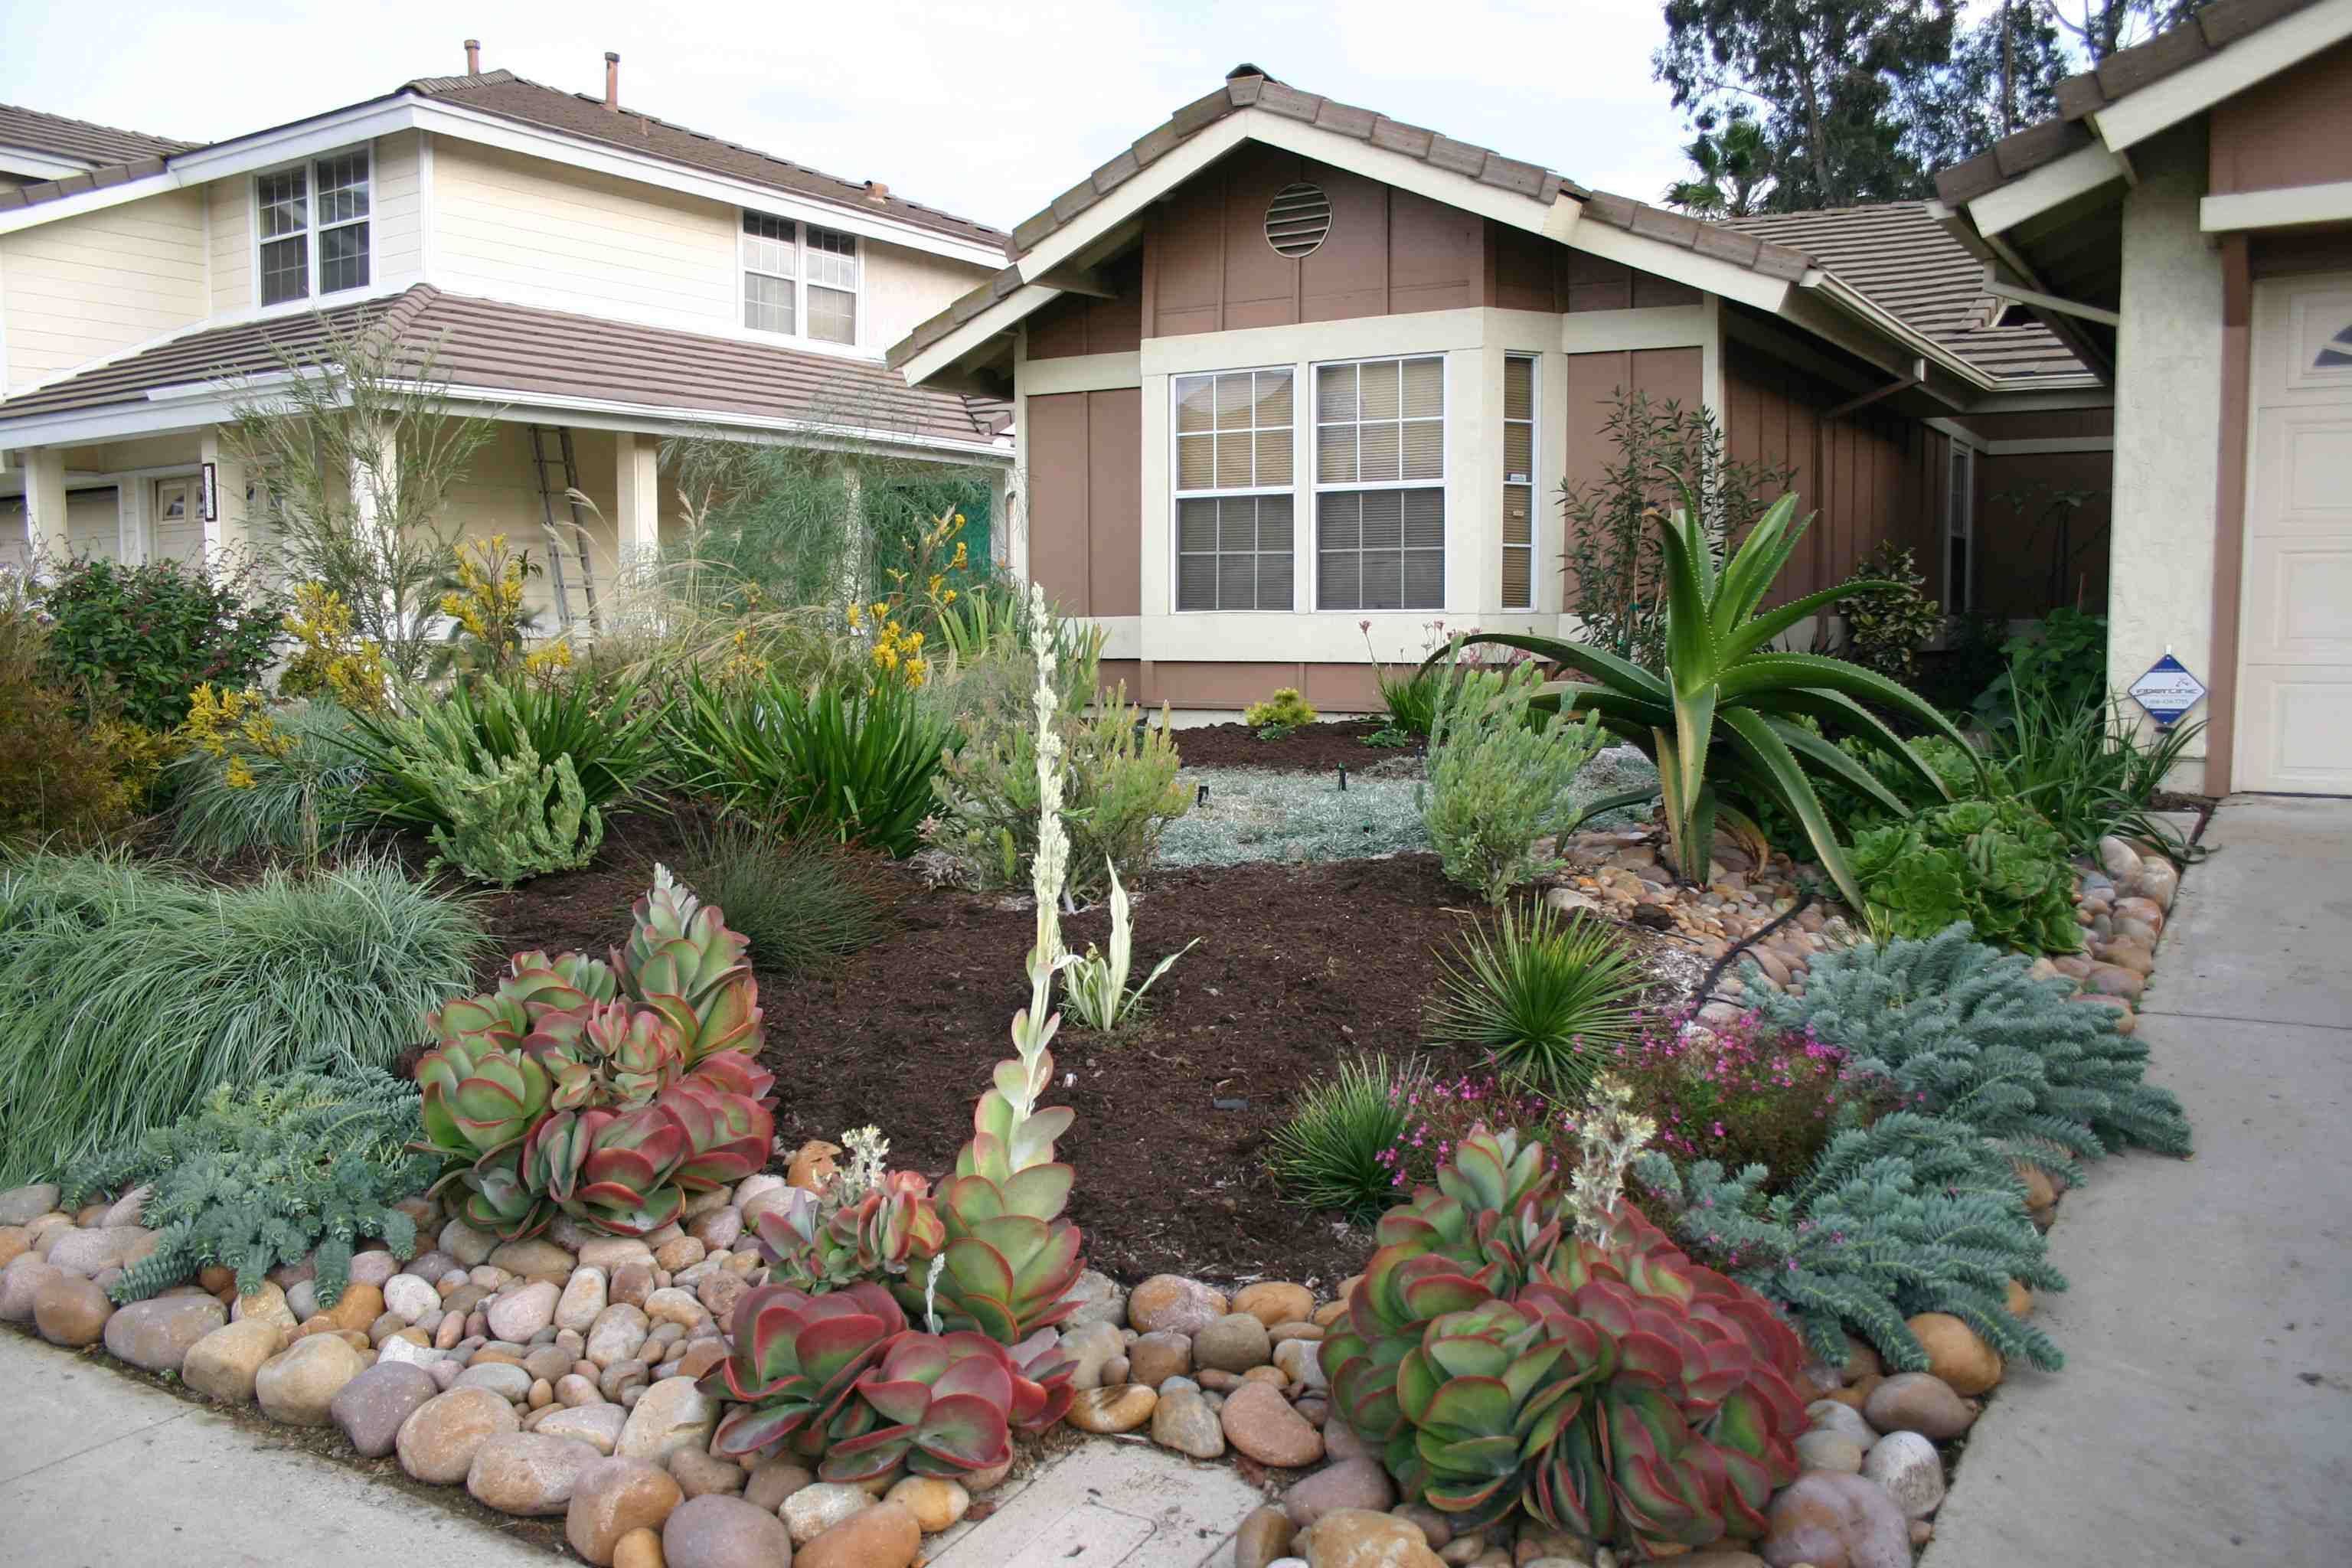 Drought Tolerant Landscaping Ideas Modlarcom Landscaping With